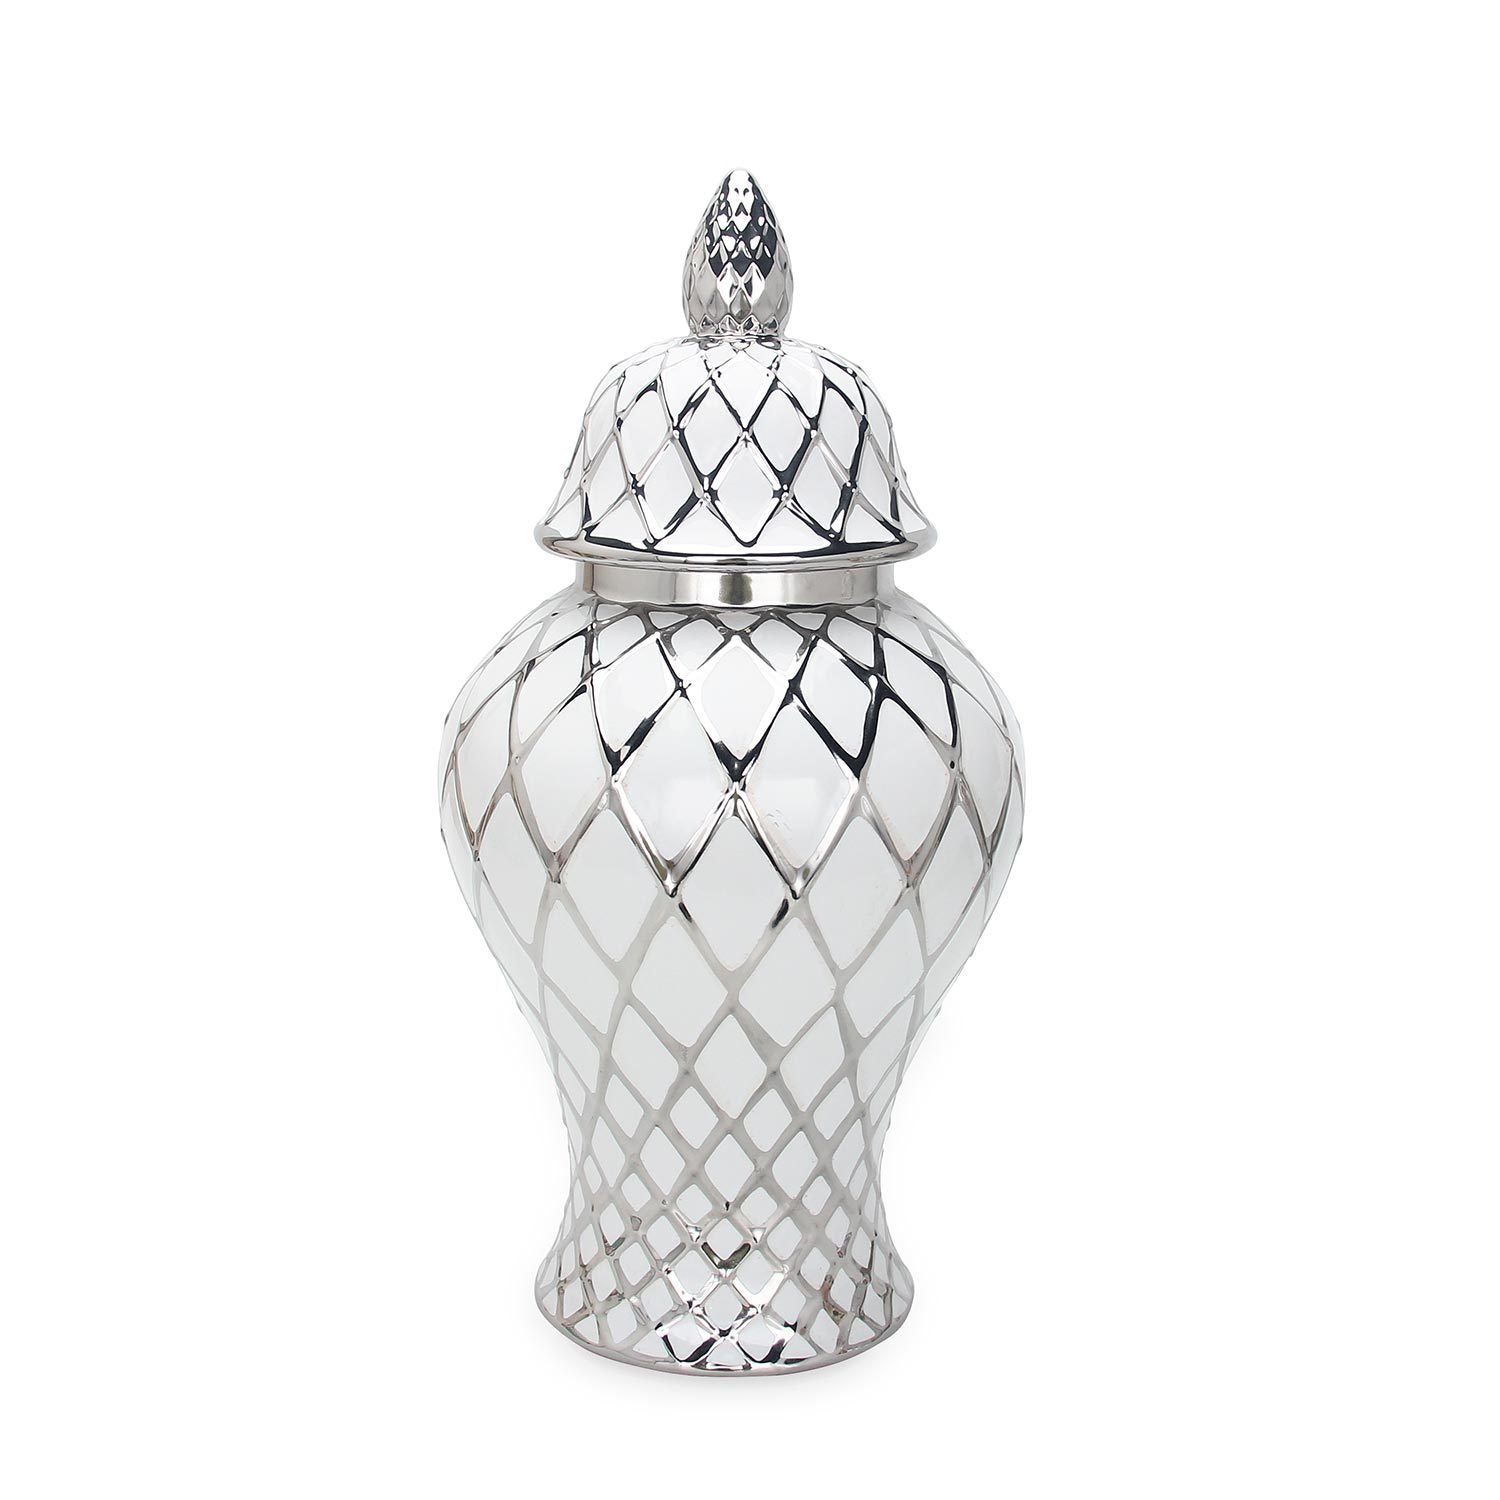 White and Silver Ceramic Decorative Jar with Lid